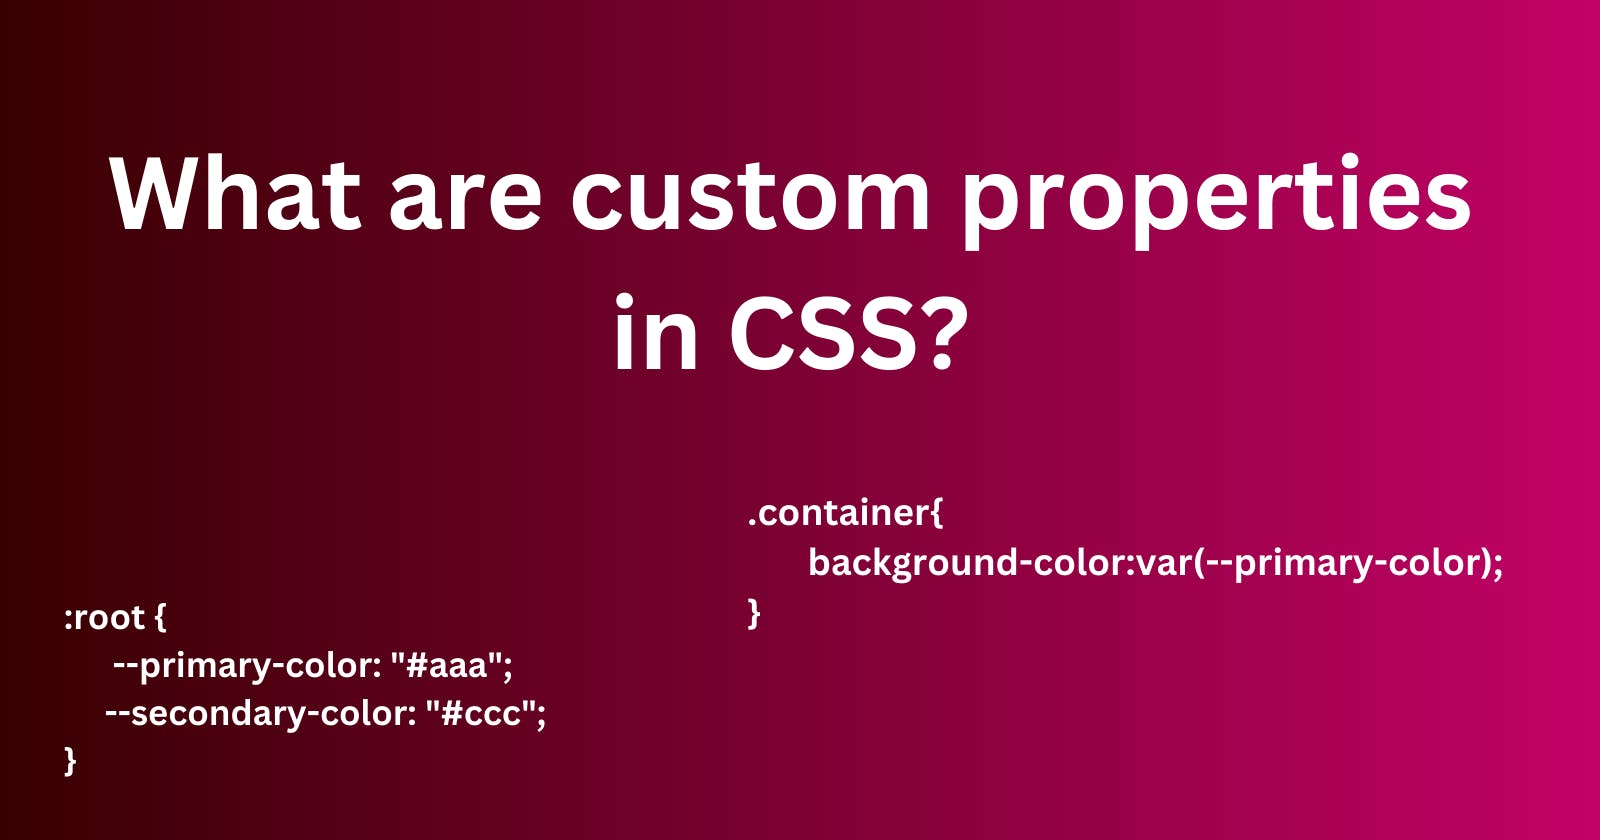 What are custom properties in CSS?